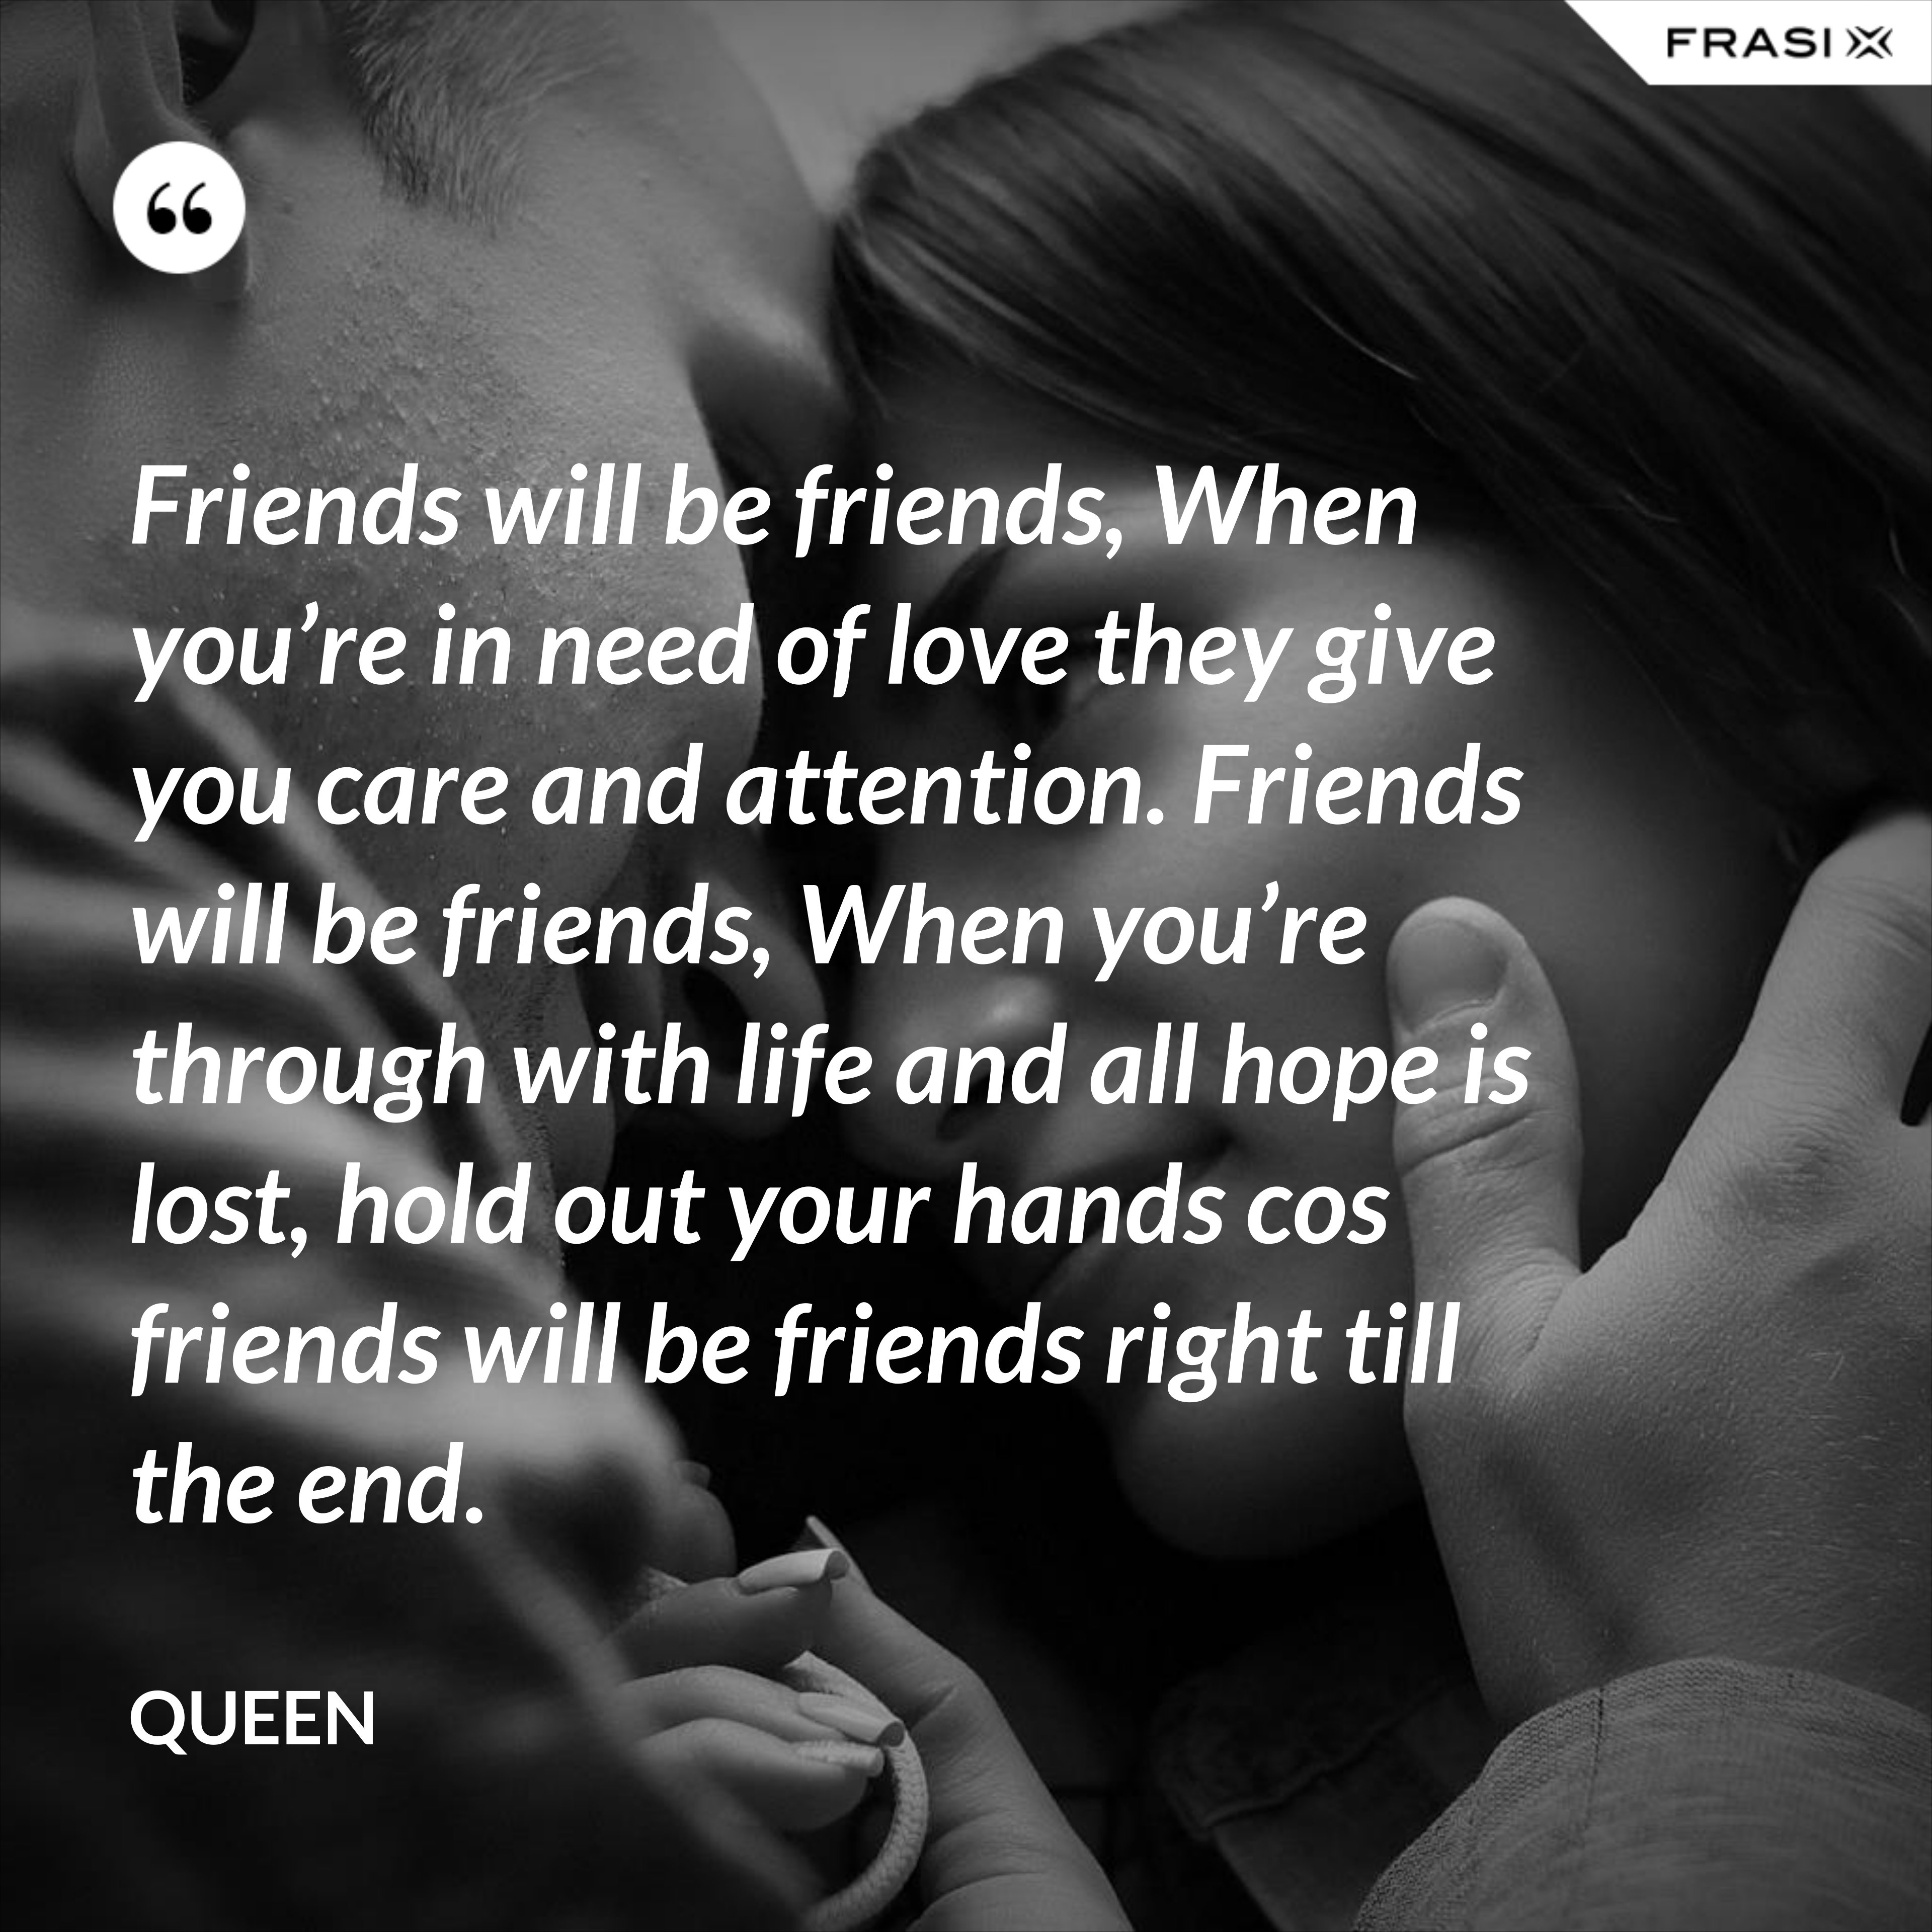 Friends will be friends, When you’re in need of love they give you care and attention. Friends will be friends, When you’re through with life and all hope is lost, hold out your hands cos friends will be friends right till the end. - Queen